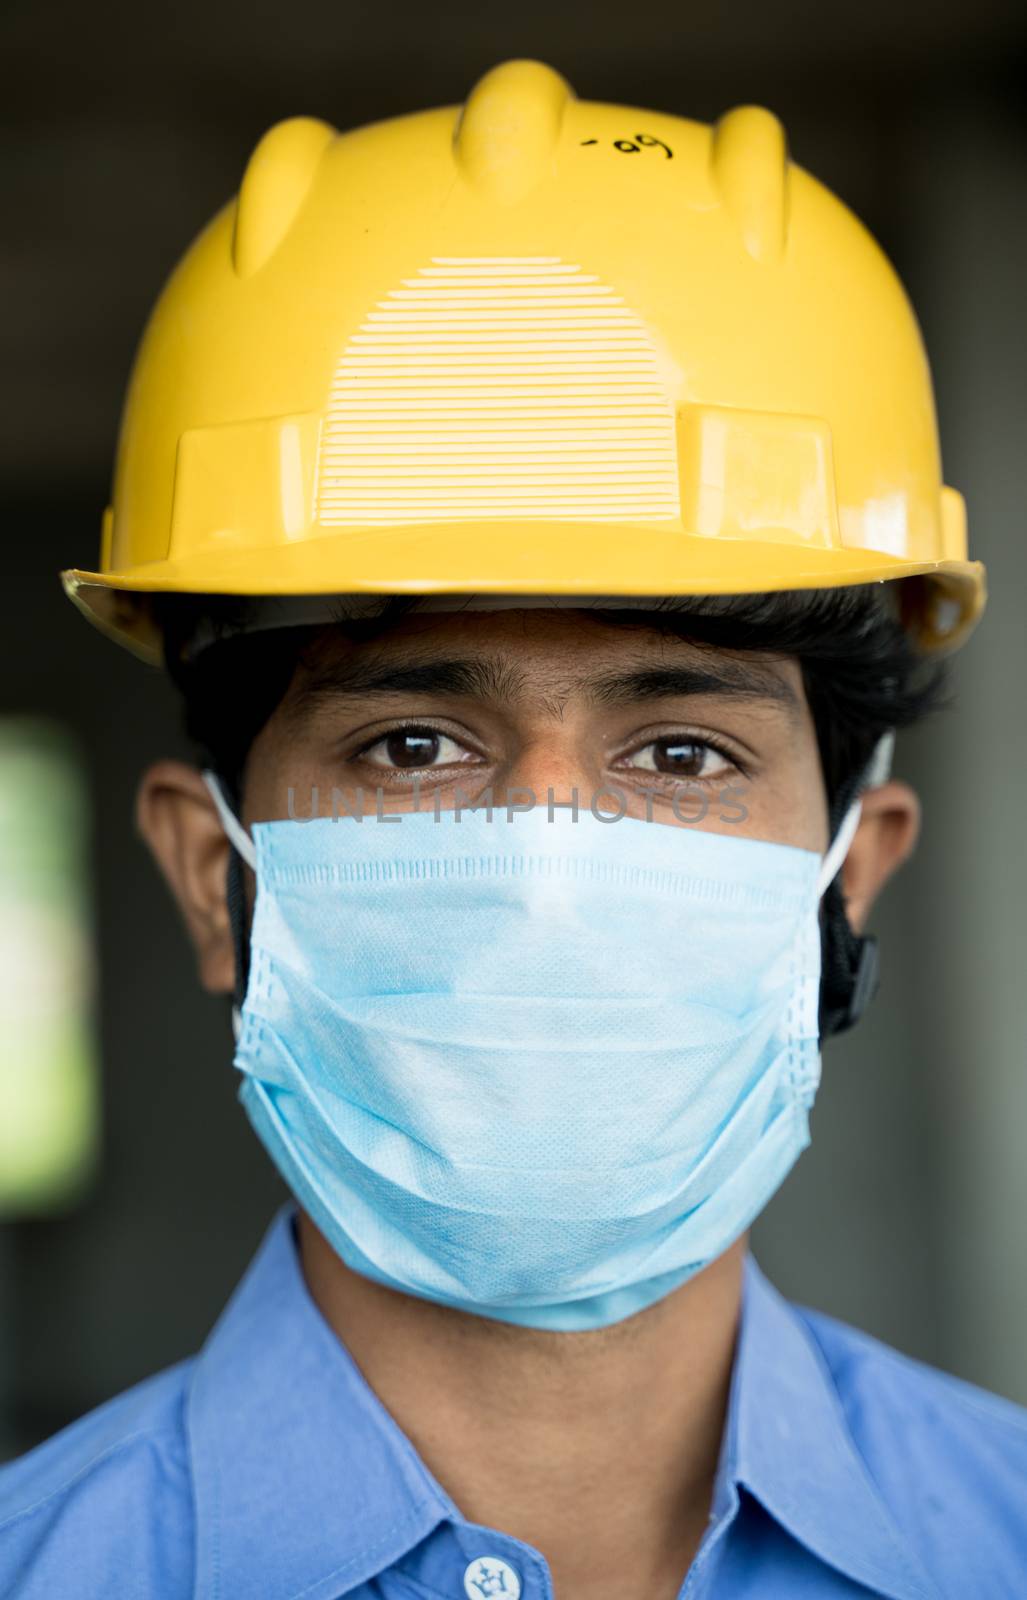 Head shot of Construction worker, reopening of construction sites or industry - construction worker in a construction helmet with medical mask due to coronavirus or covid-19 pandemic